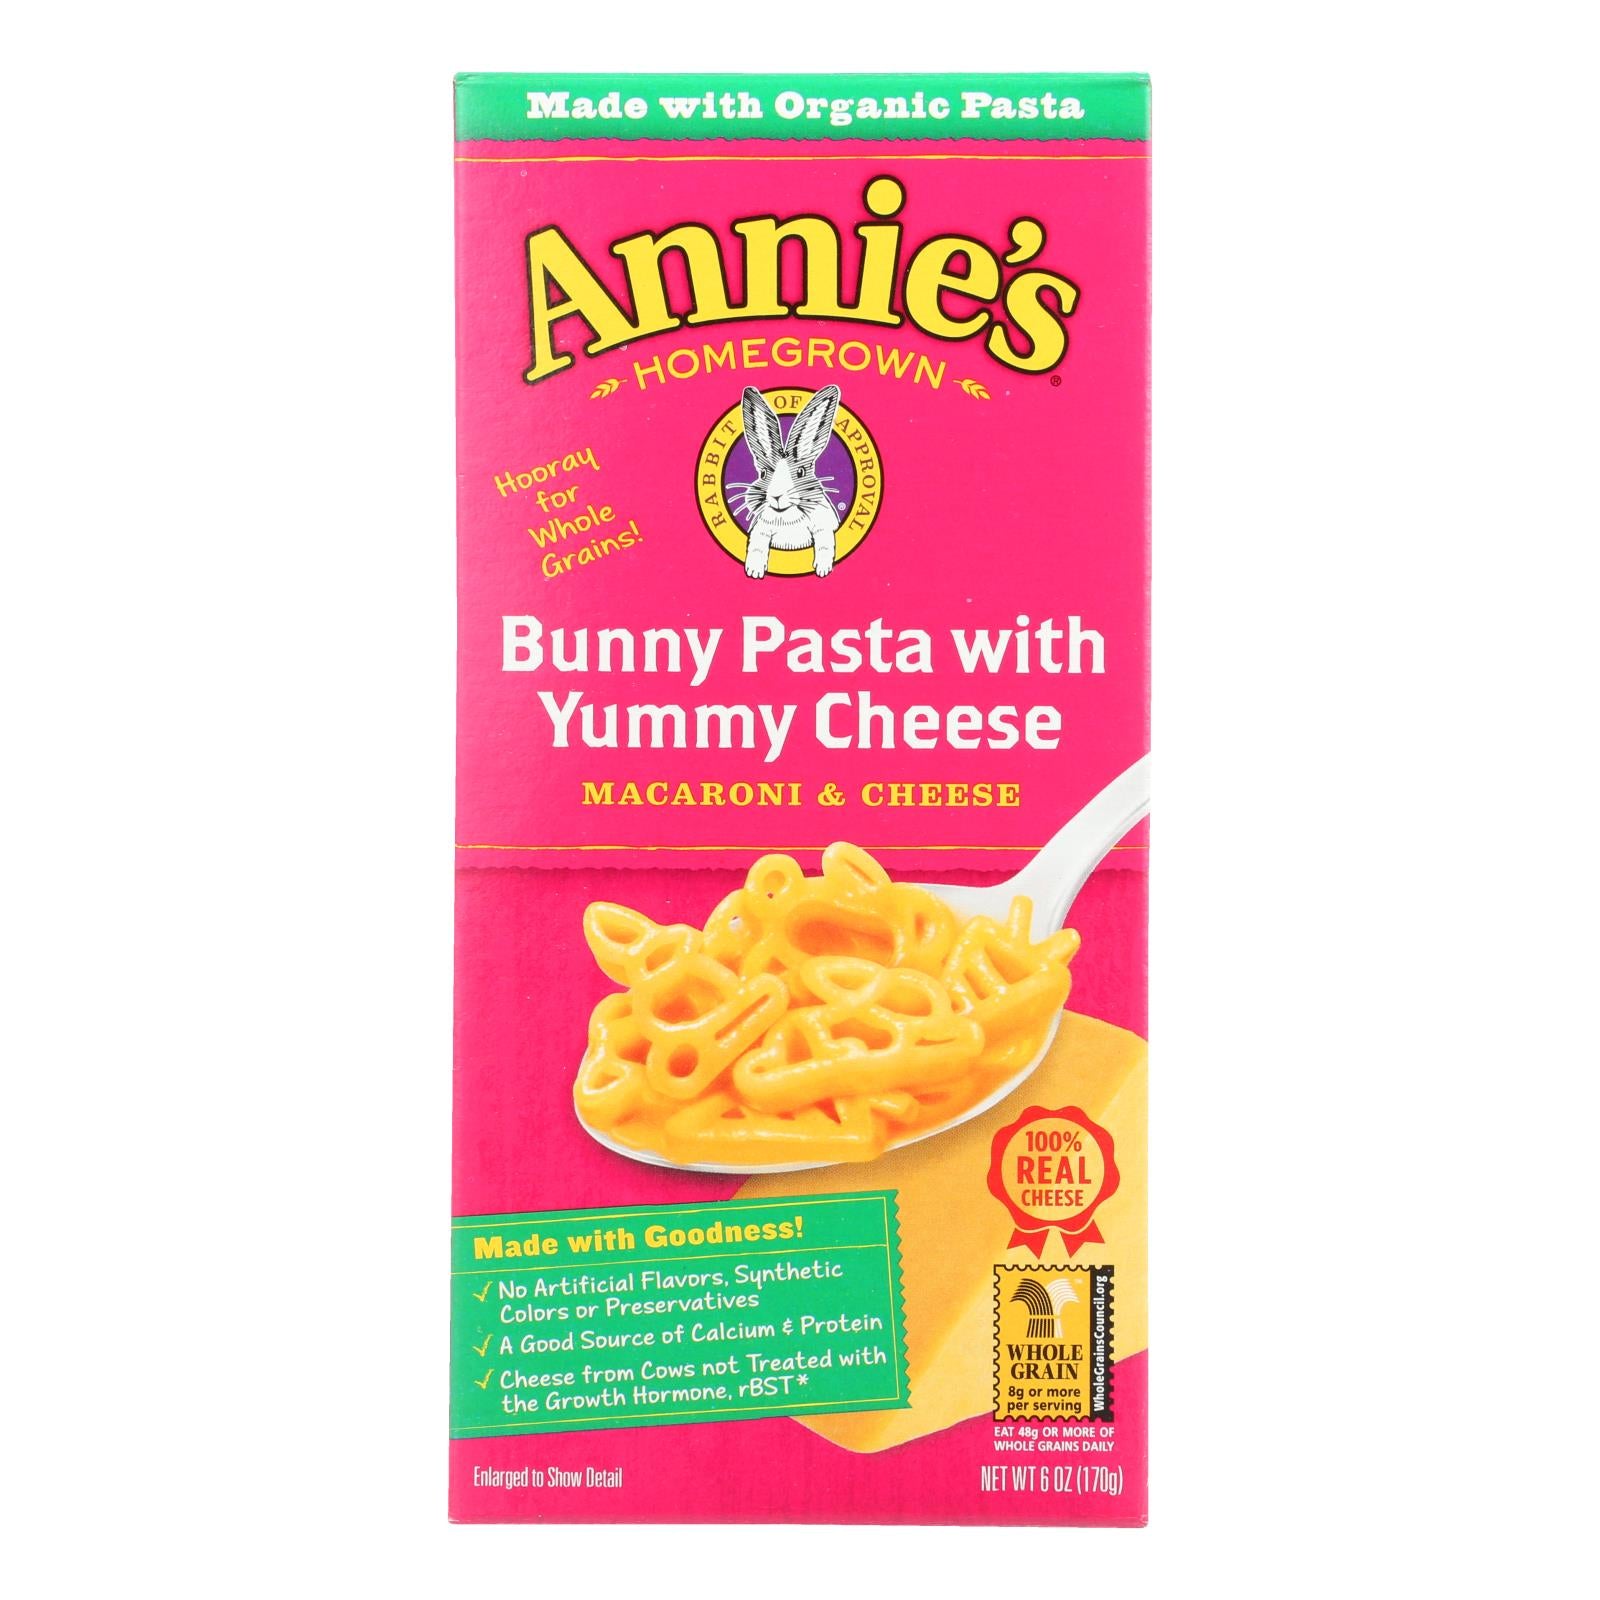 Annie'S Homegrown, Annies Homegrown Macaroni and Cheese - Organic - Bunny Pasta with Yummy Cheese - 6 oz - case of 12 (Pack of 12)